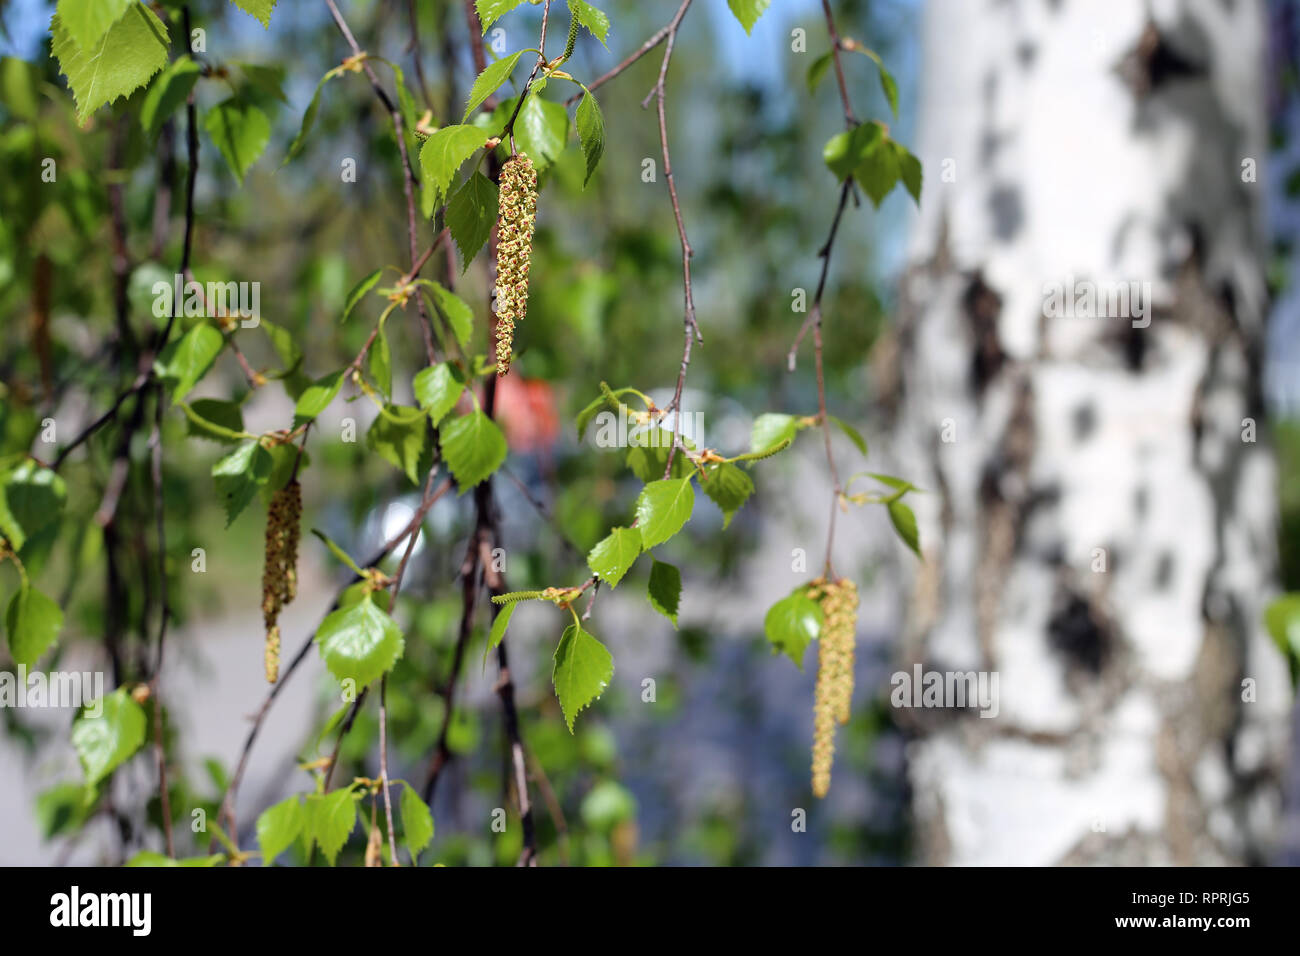 Birch tree details - catkins, flowers, leaves and tree trunk. Colorful spring / summertime image was taken during sunny day in Finland. Stock Photo